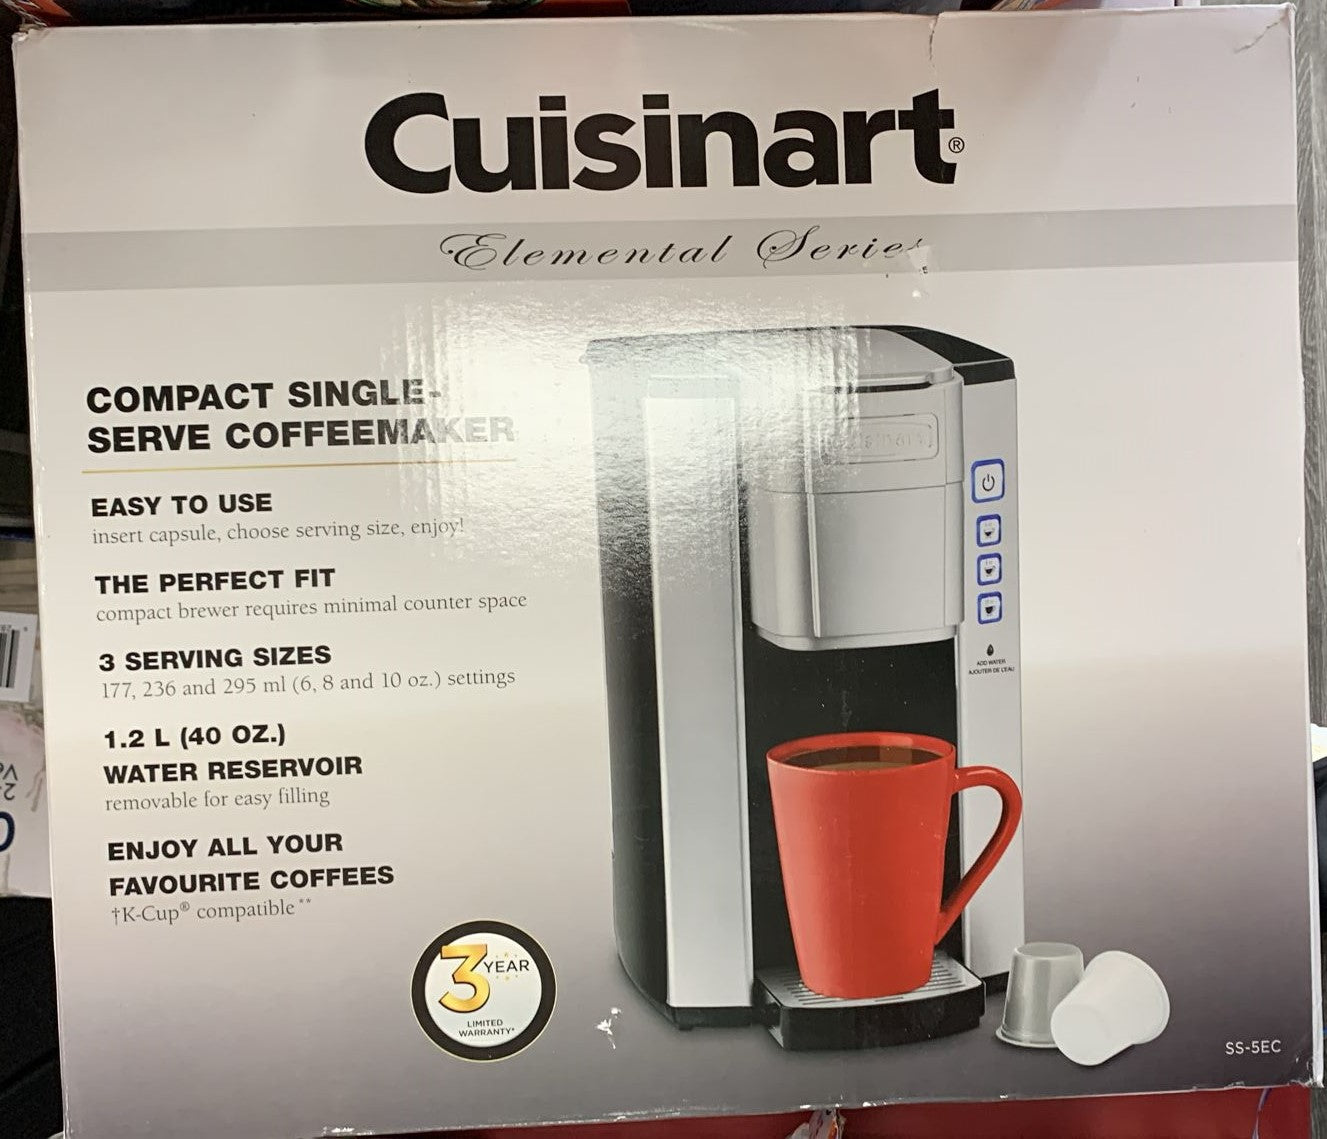 Cuisinart Classic Coffee Makers